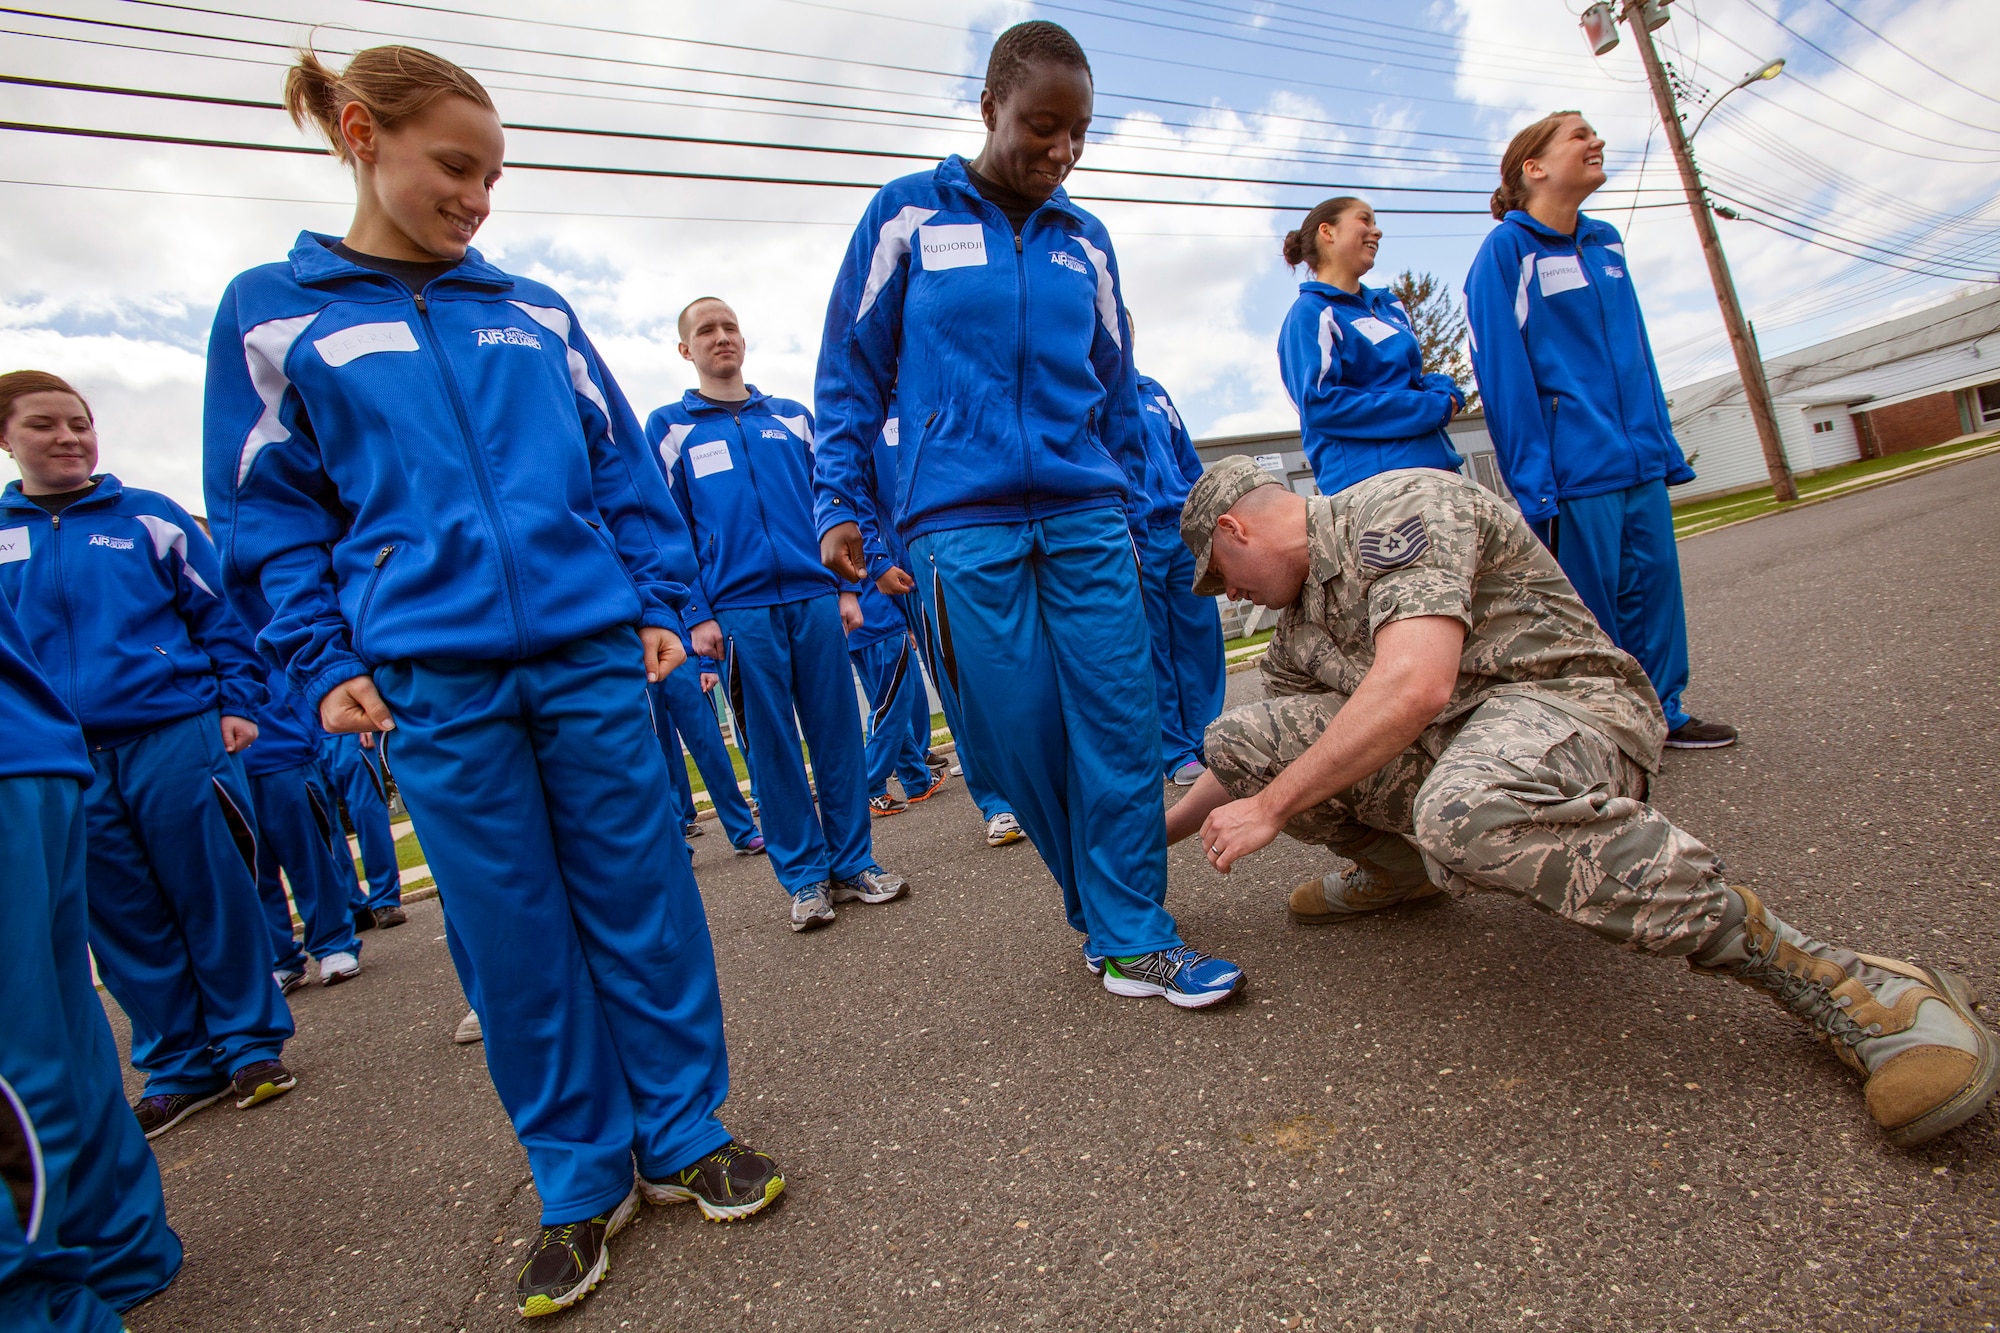 Tech. Sgt. James Morris, right, a recruiter with the 177th Fighter Wing, explains the about face movement to Edana A. Kudjordji, 108th Wing Student Flight, April 13, 2013, at the National Guard Training Center in Sea Girt, N.J. Forty-four members of the New Jersey Air National Guard Student Flight spent a weekend in a simulated basic training environment preparing them for military culture April 13 and 14. (U.S. Air National Guard photo by Master Sgt. Mark C. Olsen/Released)